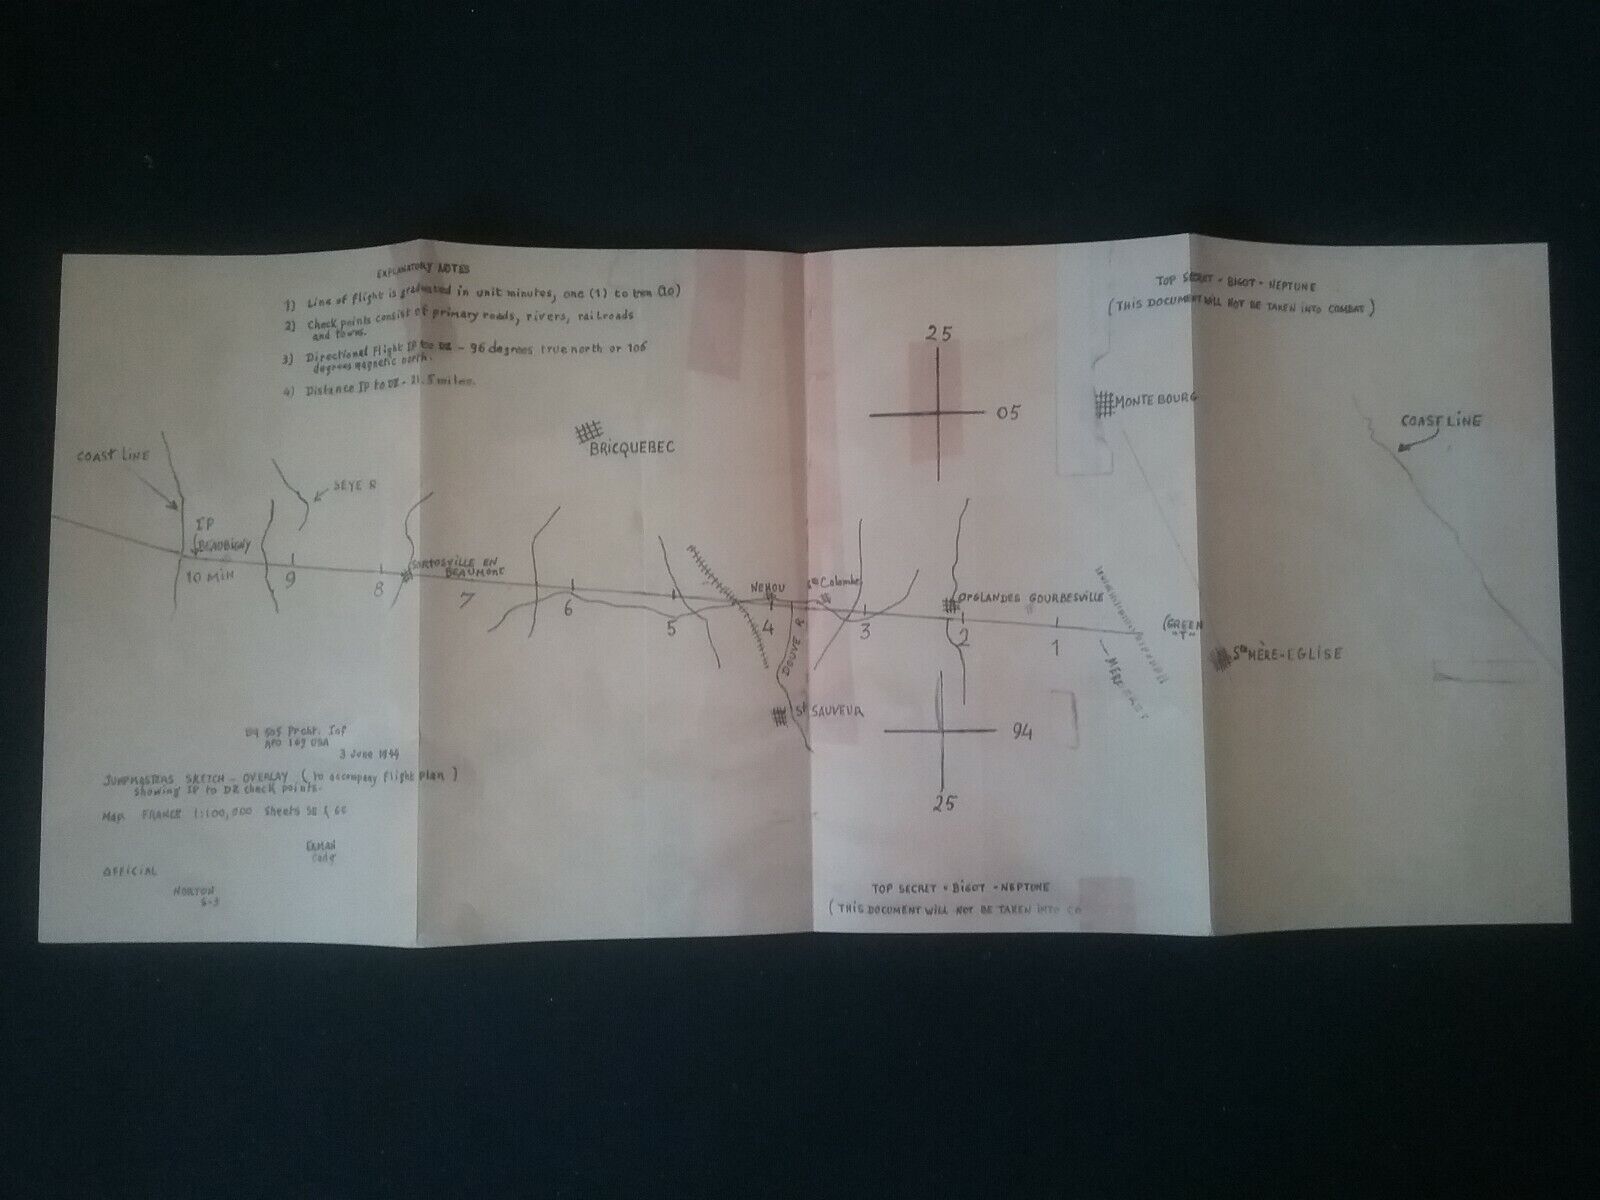 D-DAY TOP SECRET HAND DRAWN MAP ,DROP ZONE WEST OF STE-MERE-EGLISE 82ND AIRBORNE